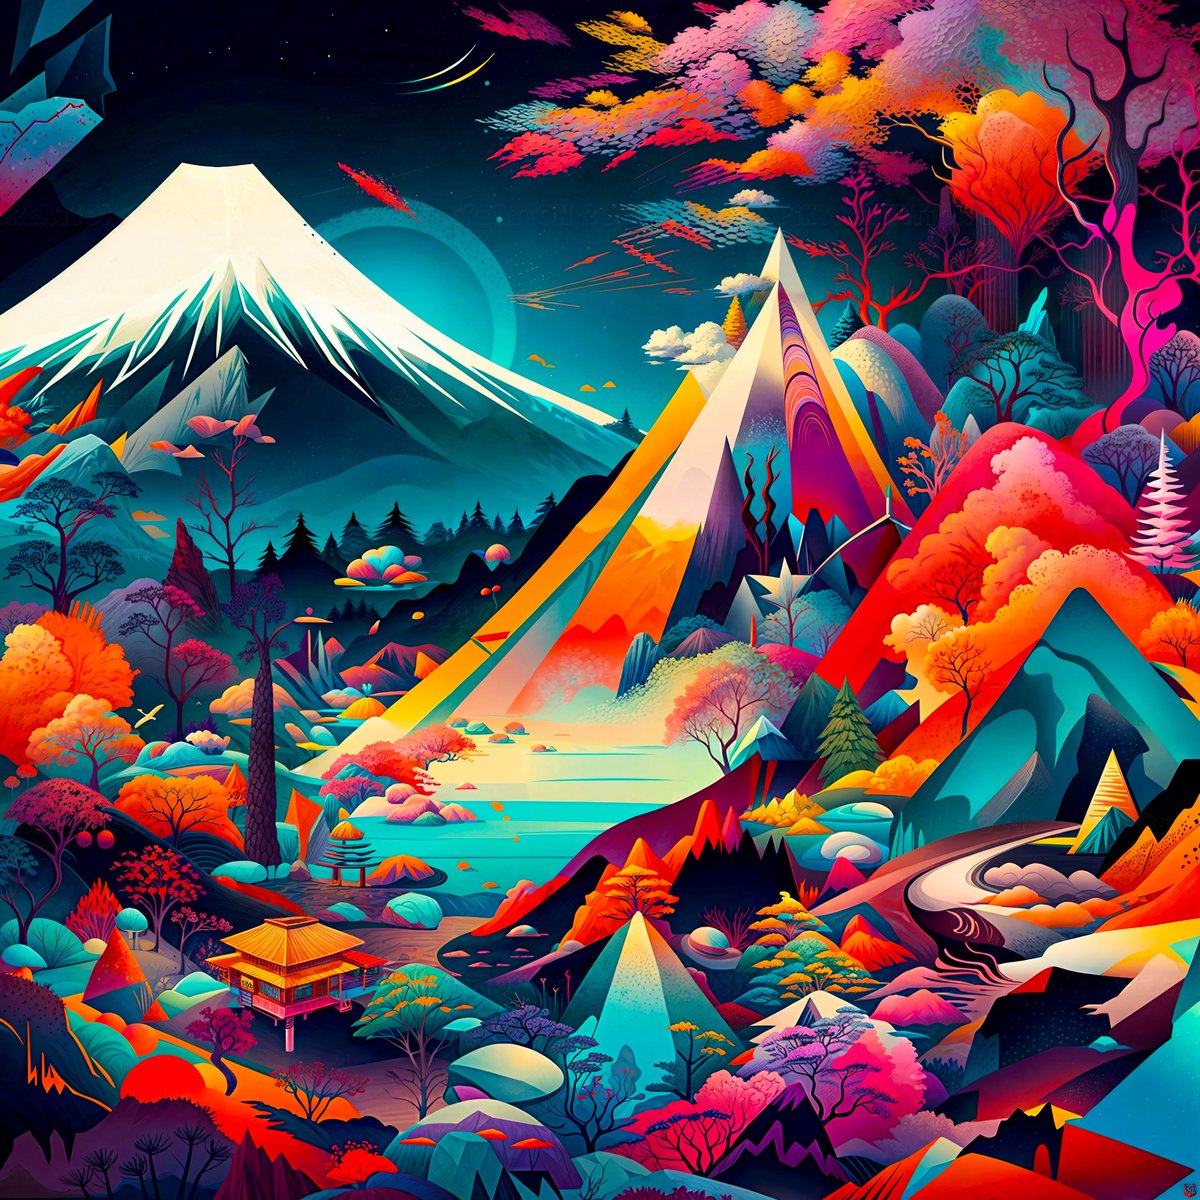 🗻Escape to the Funky Fuji, a colorful valley at the foot of Mount Fuji. #EchoesChromatic #DigitalArt #DigitalCollage